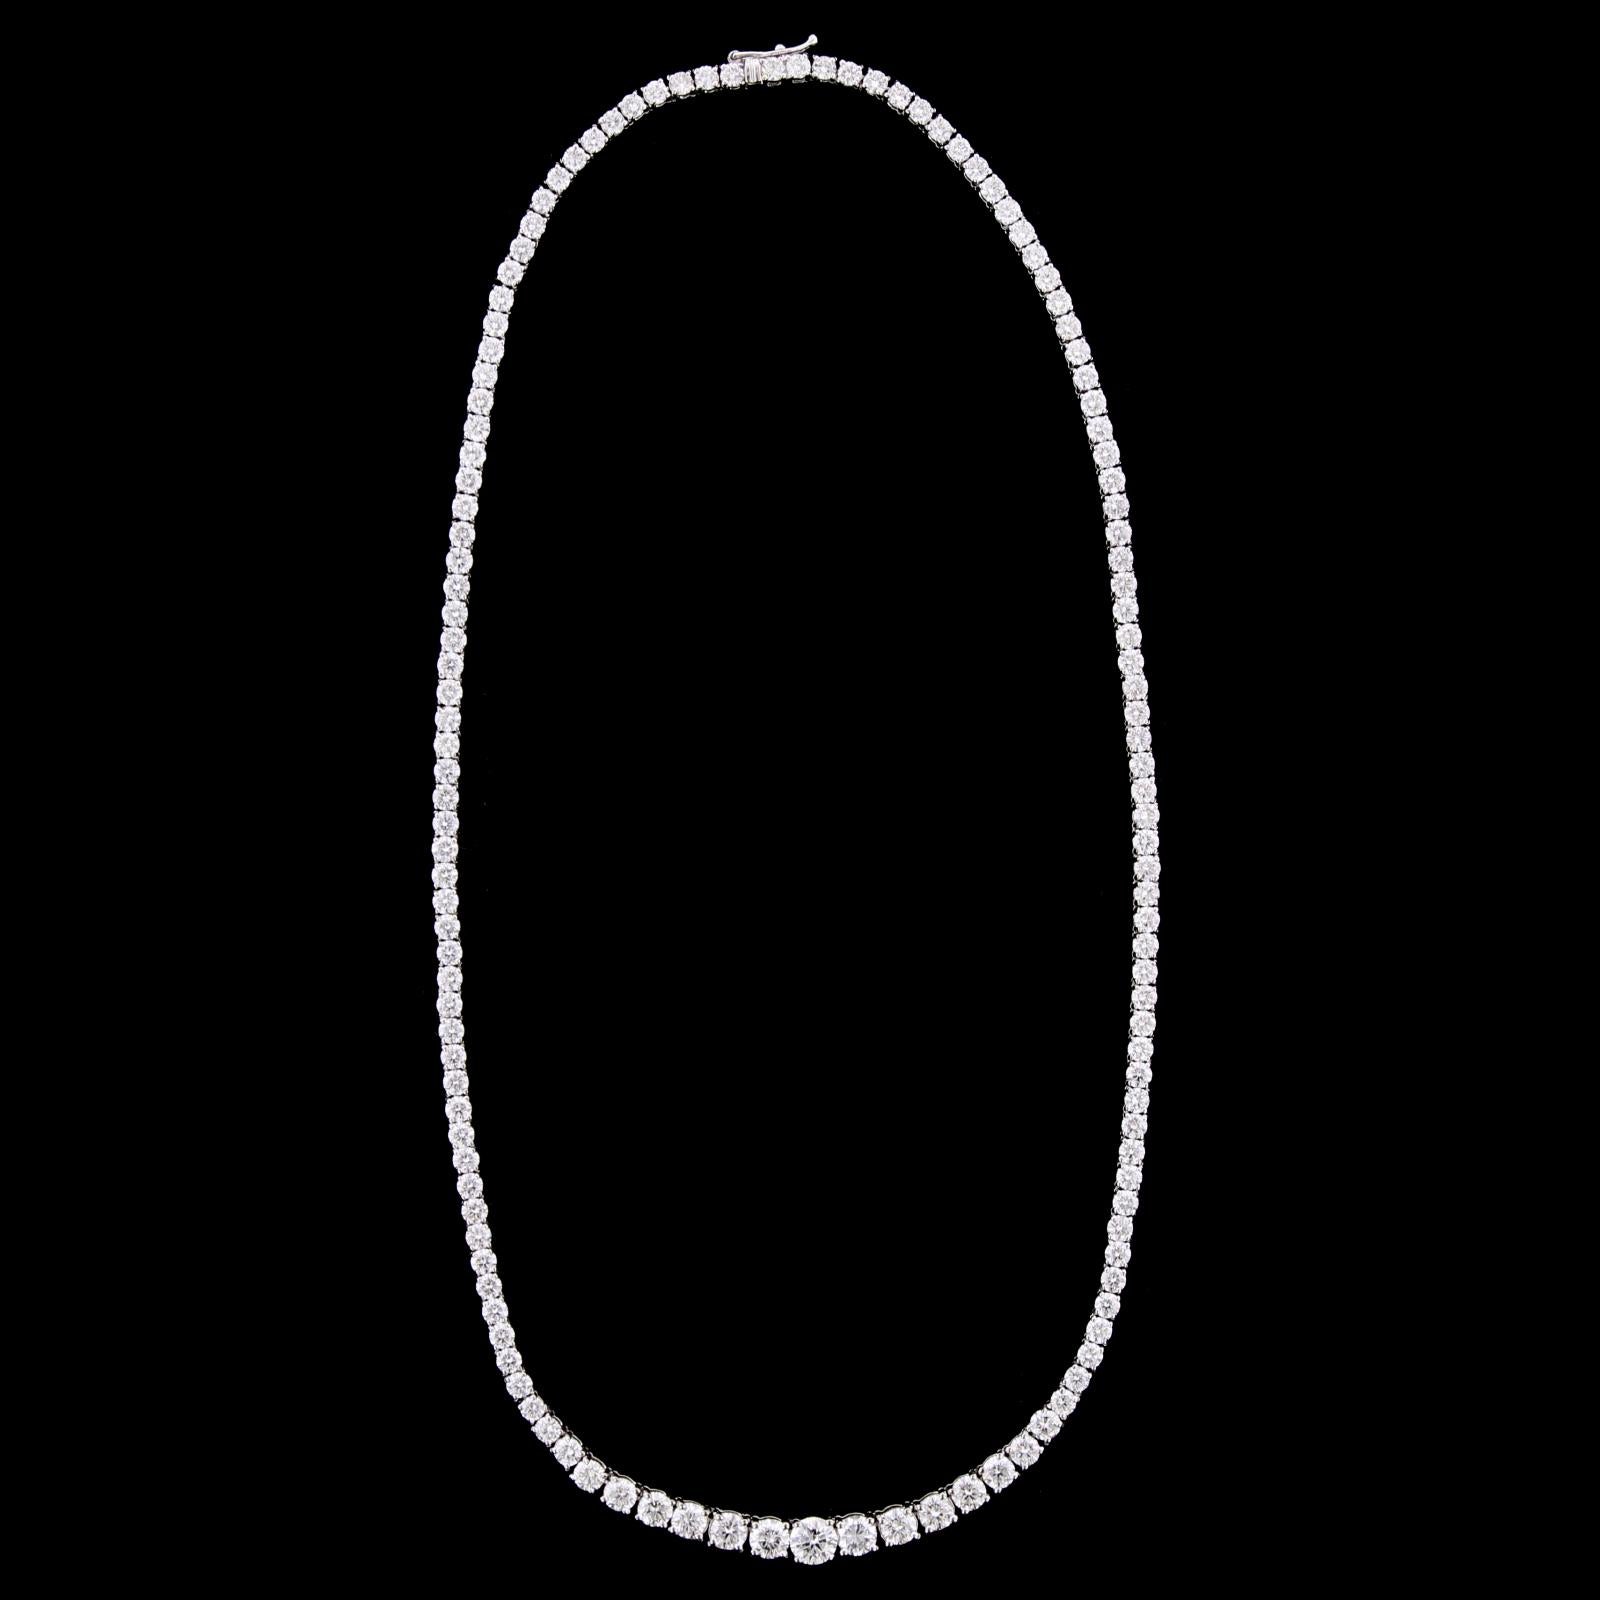 18K White Gold Diamond Riviere. The necklace is set with 132 graduated round
brilliant cut diamonds, approximate total wt. 12.00cts., HI color, SI clarity, length 16 1/2